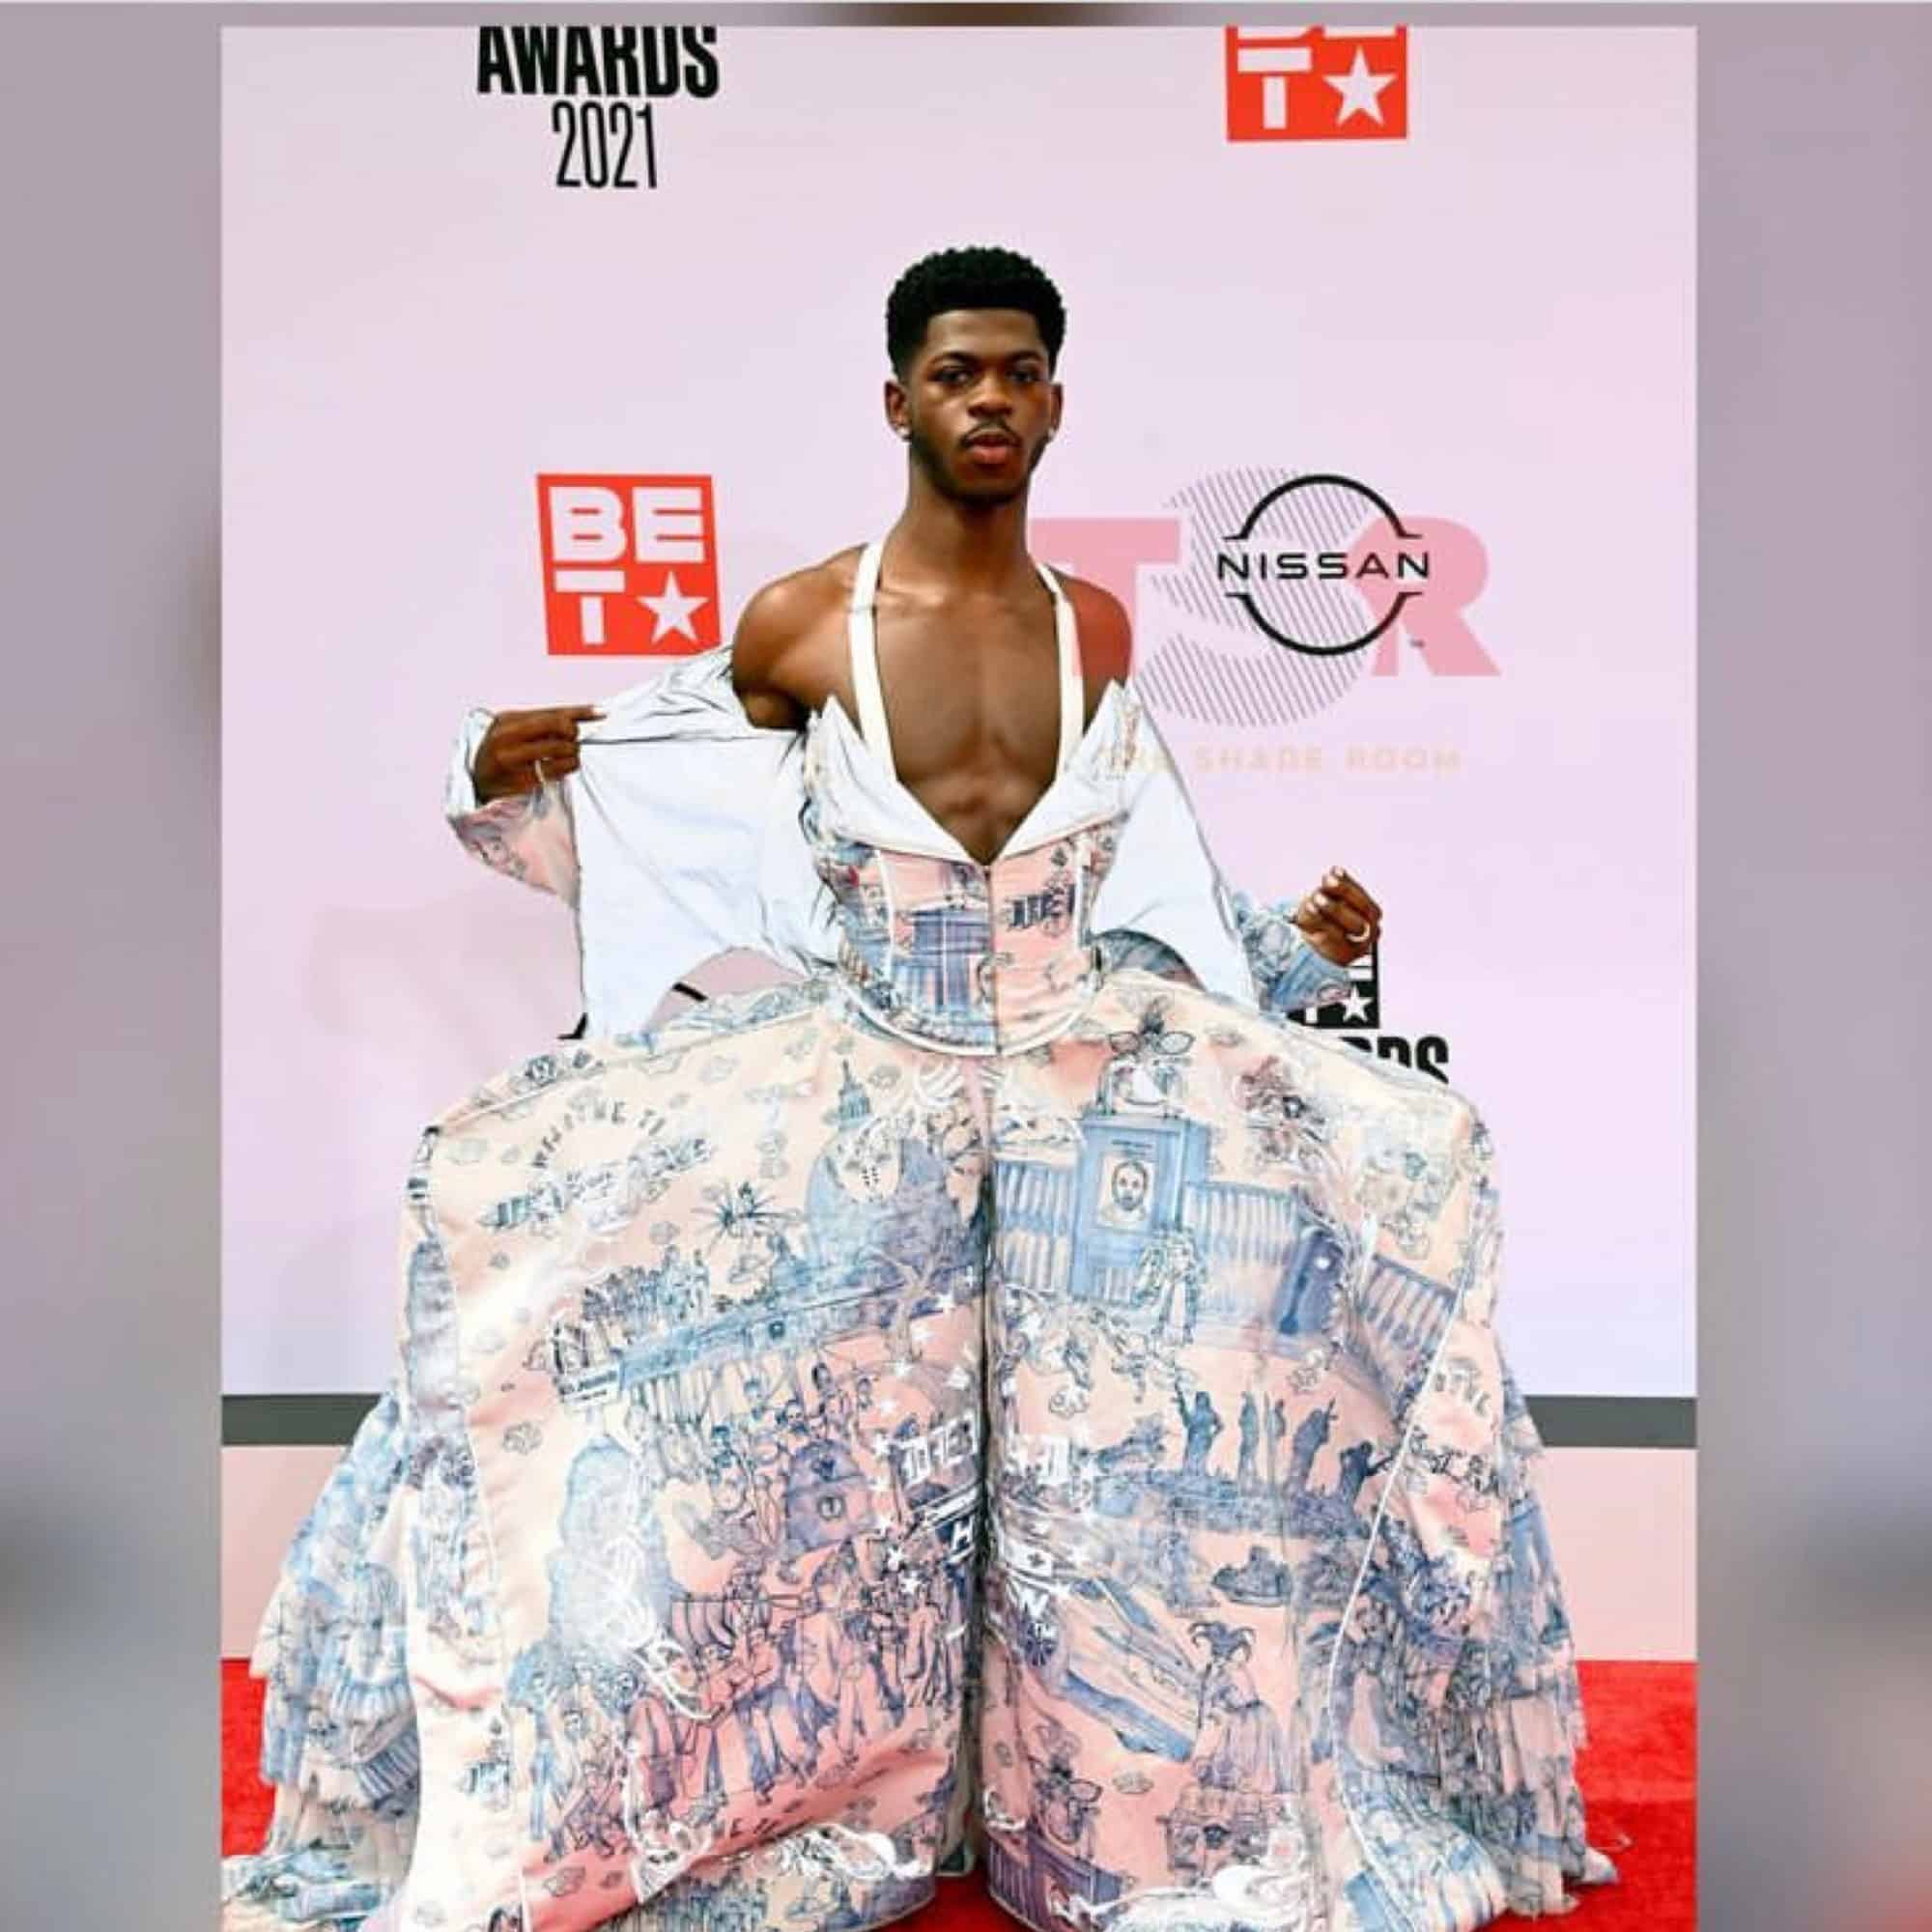 Lil Nas X tends after kissing his dancer during BET awards - Journal Beat